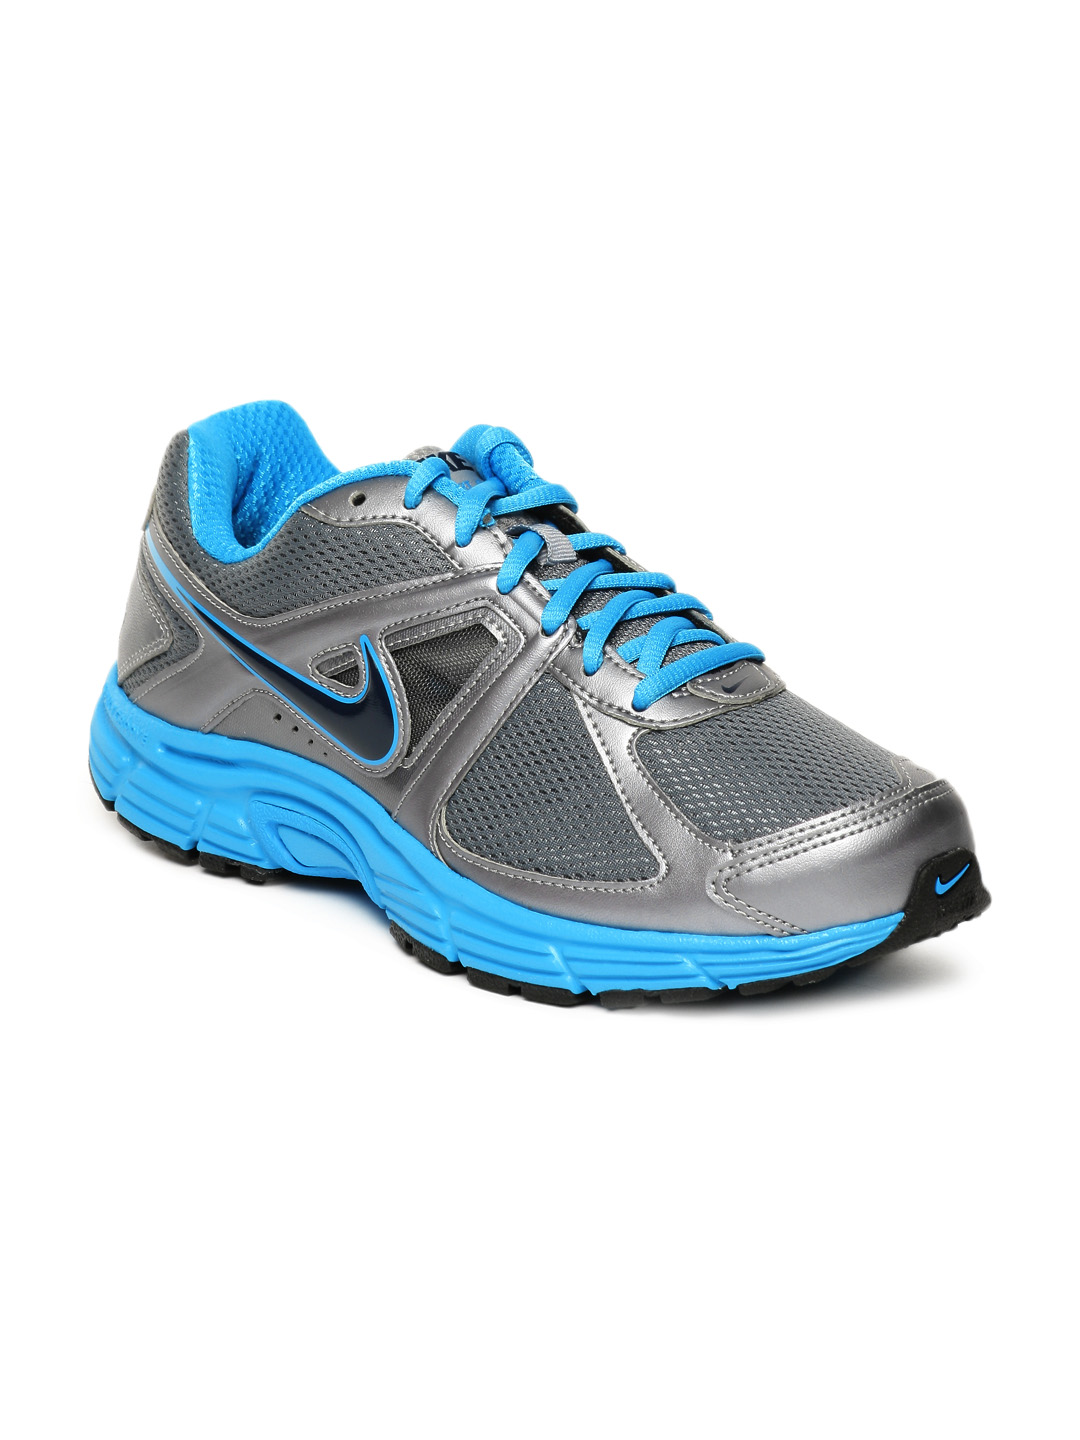 Download this Sports Shoes Bcbededd... picture